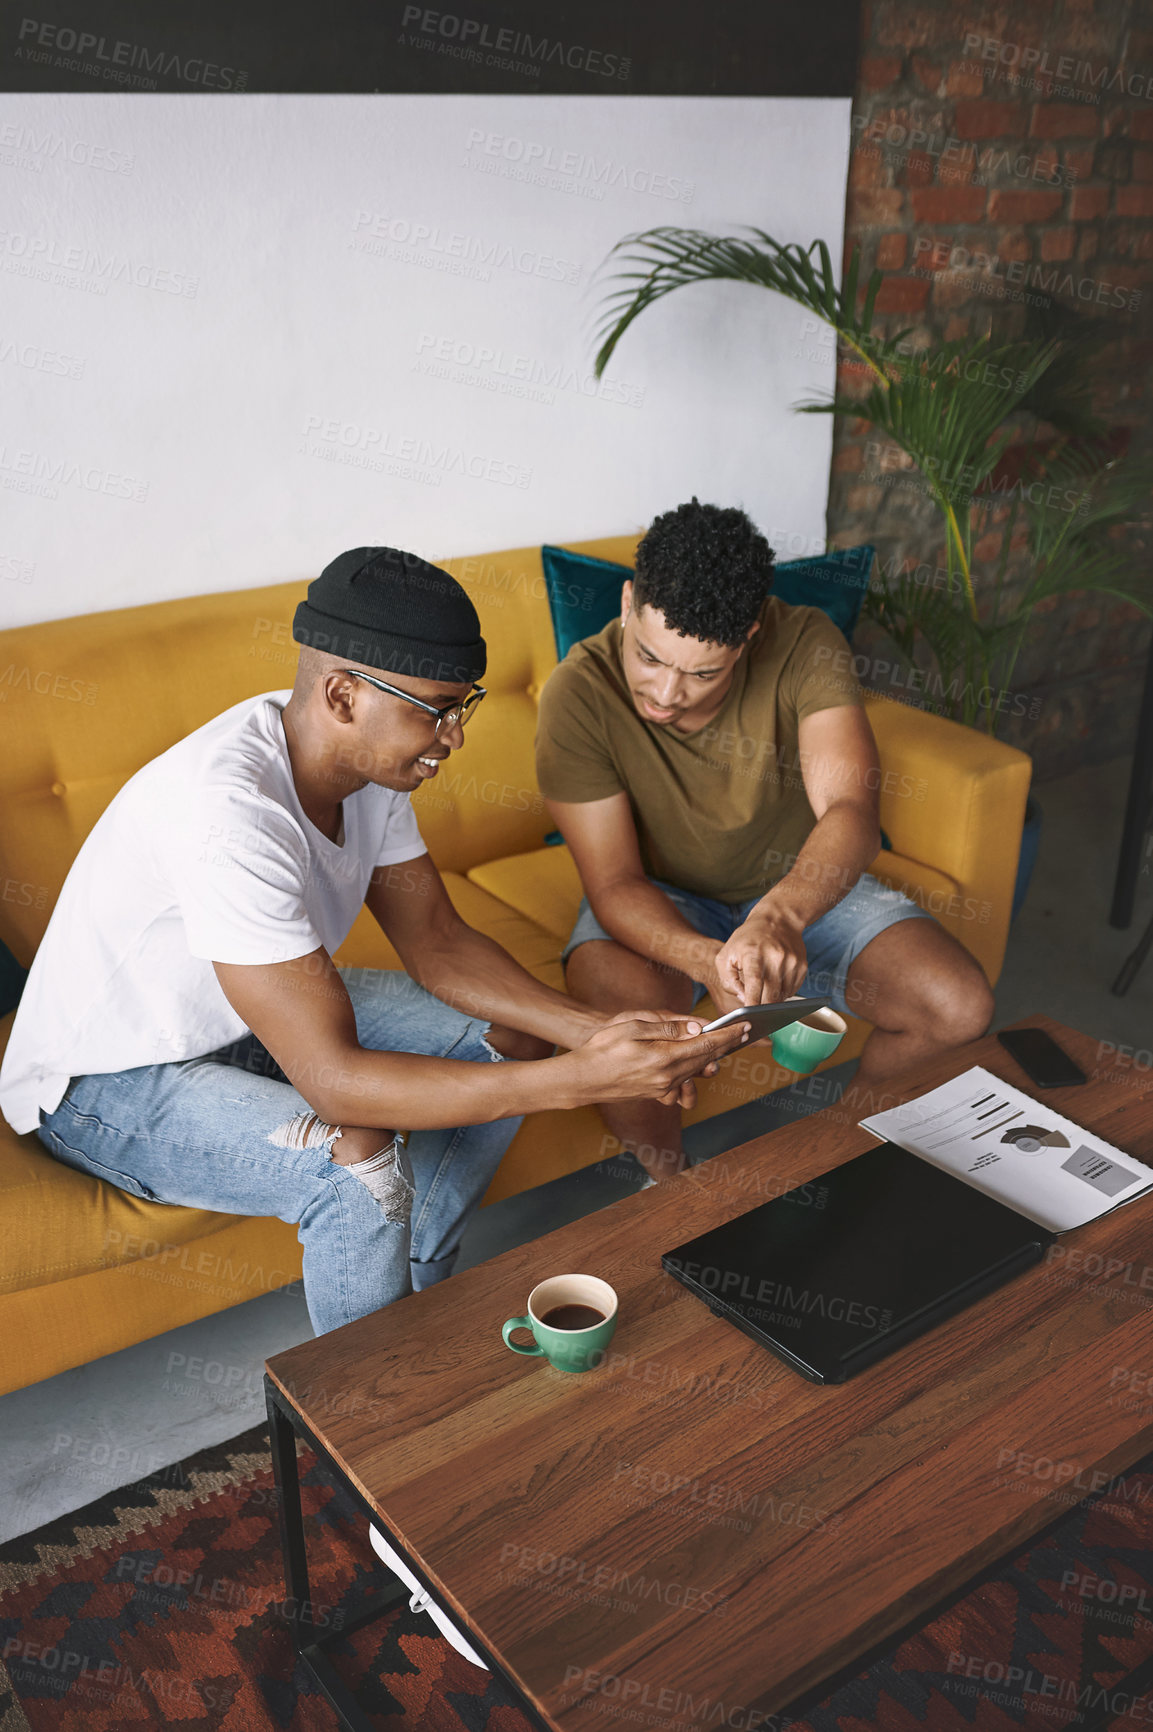 Buy stock photo Shot of two young men using a digital tablet while sitting together in a coffee shop